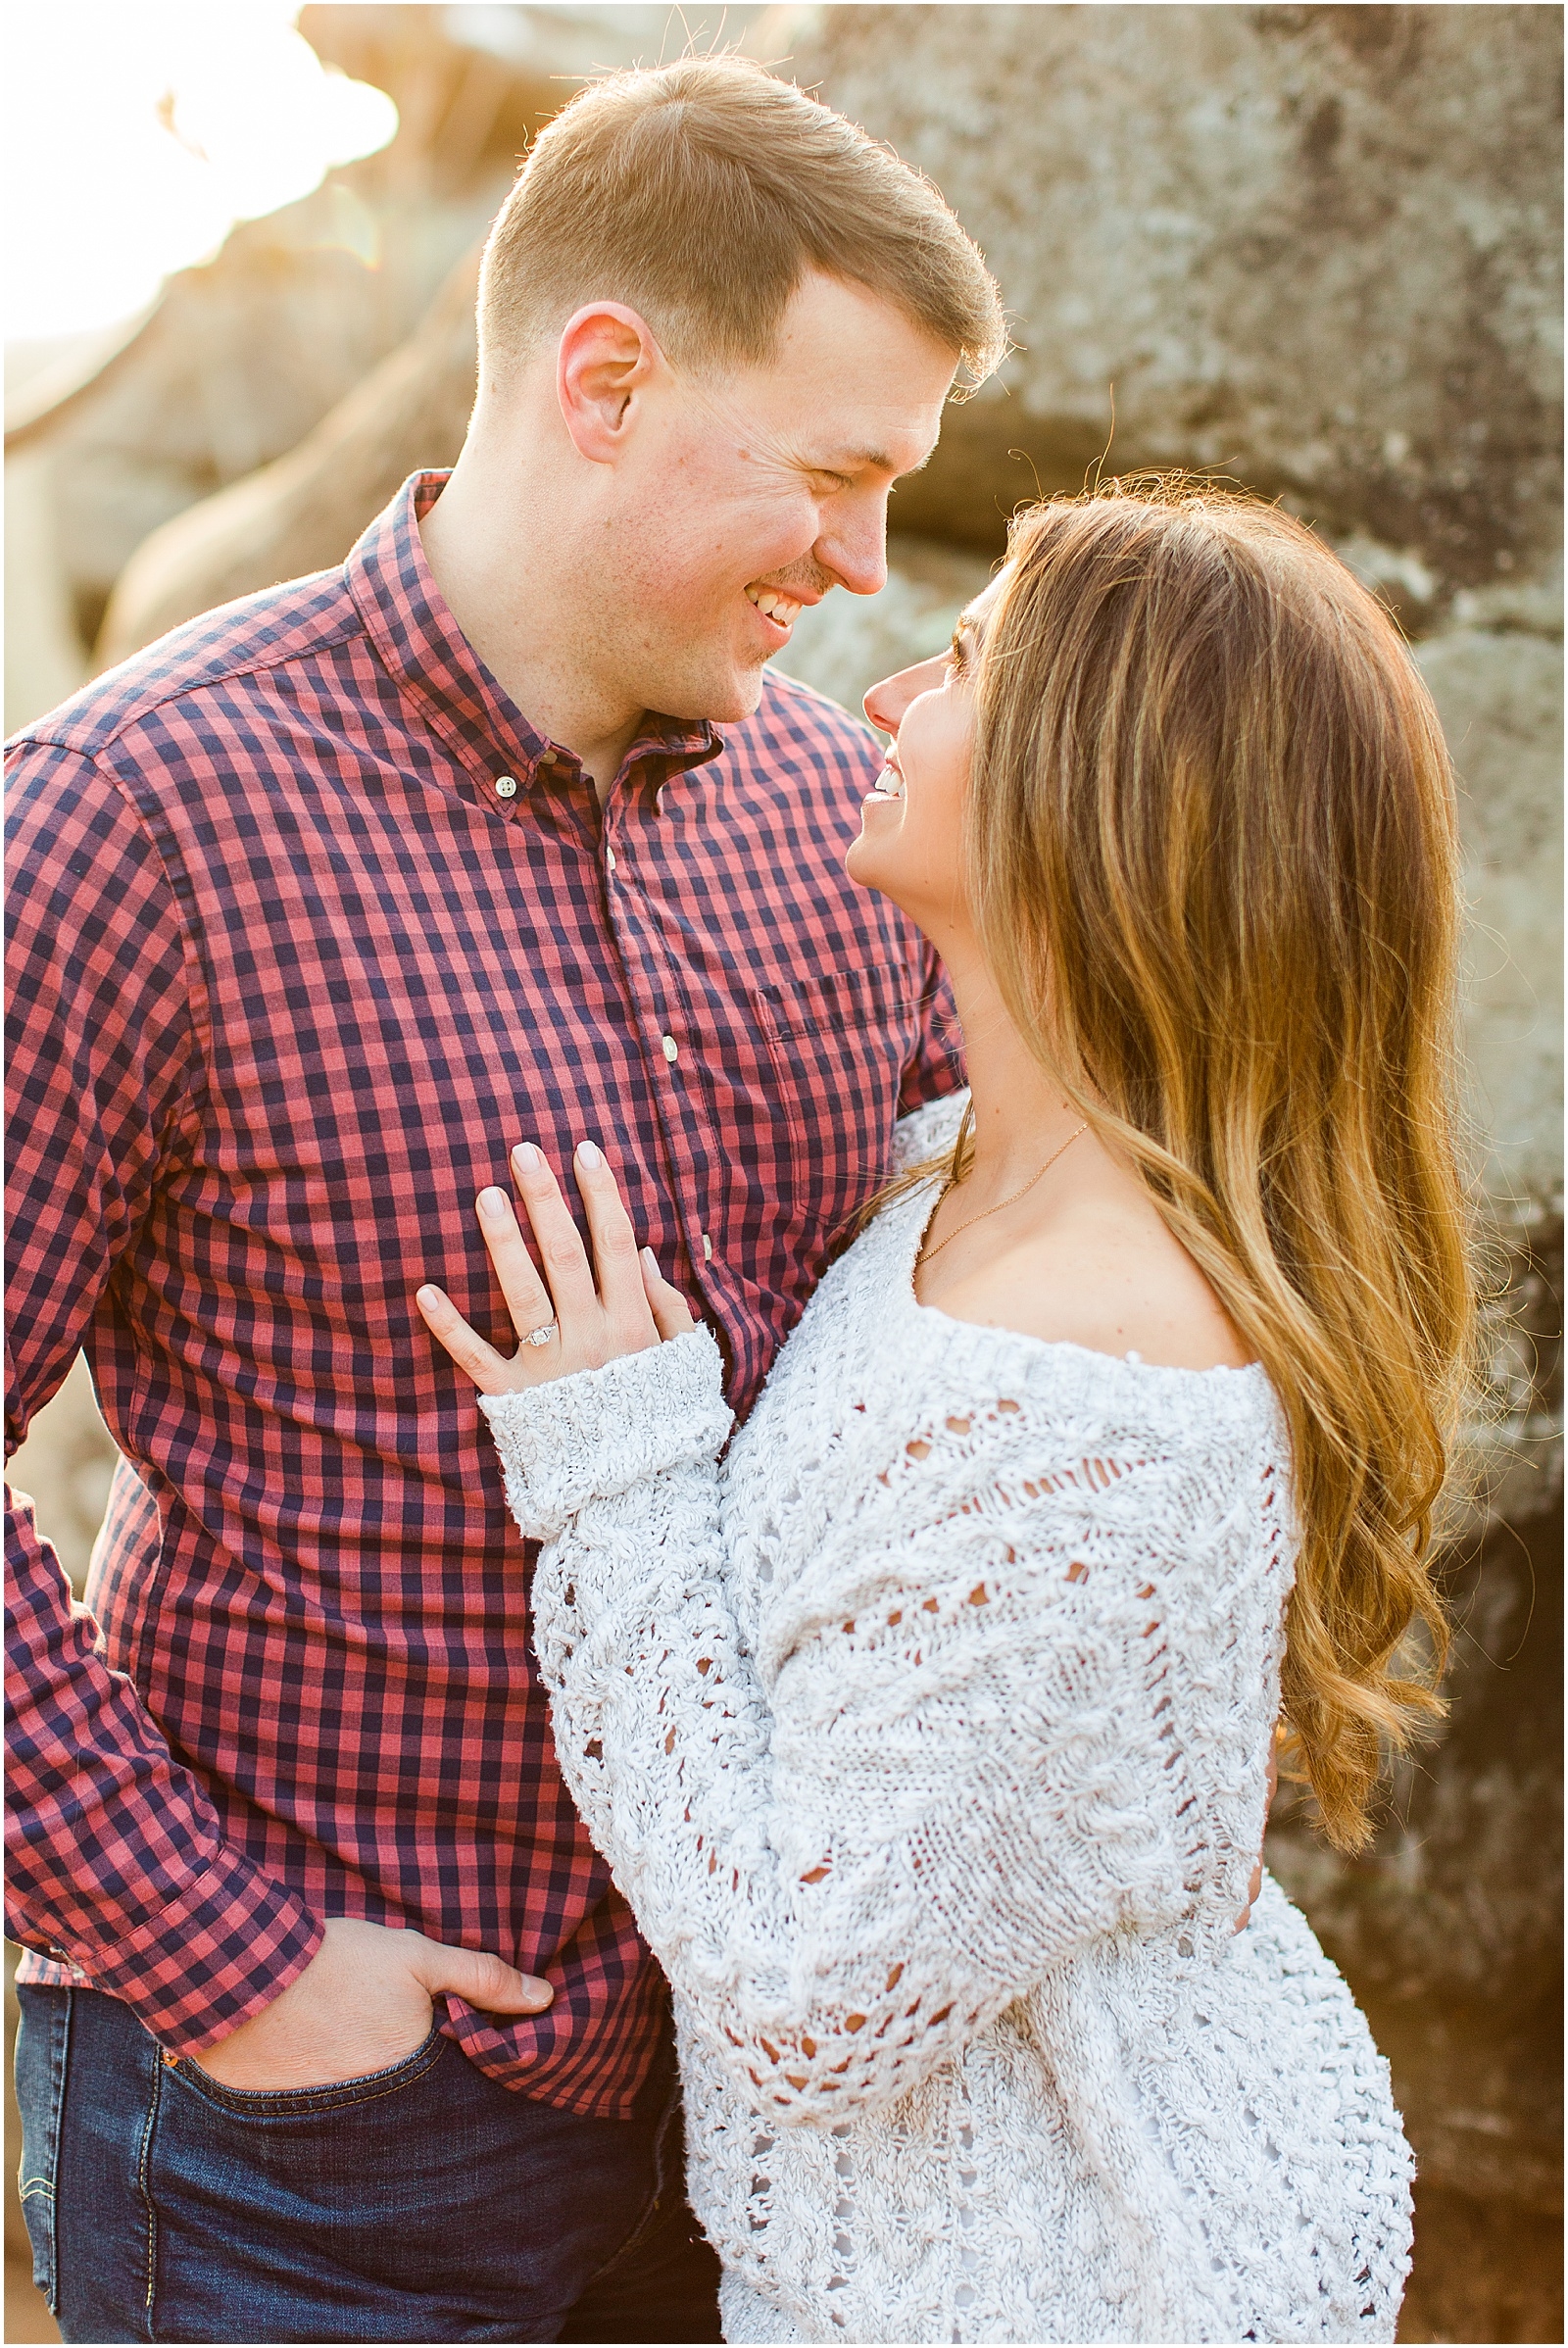 A Sunny Garden of the Gods Engagement Session | Shiloh and Lee | Bret and Brandie Photography056.jpg